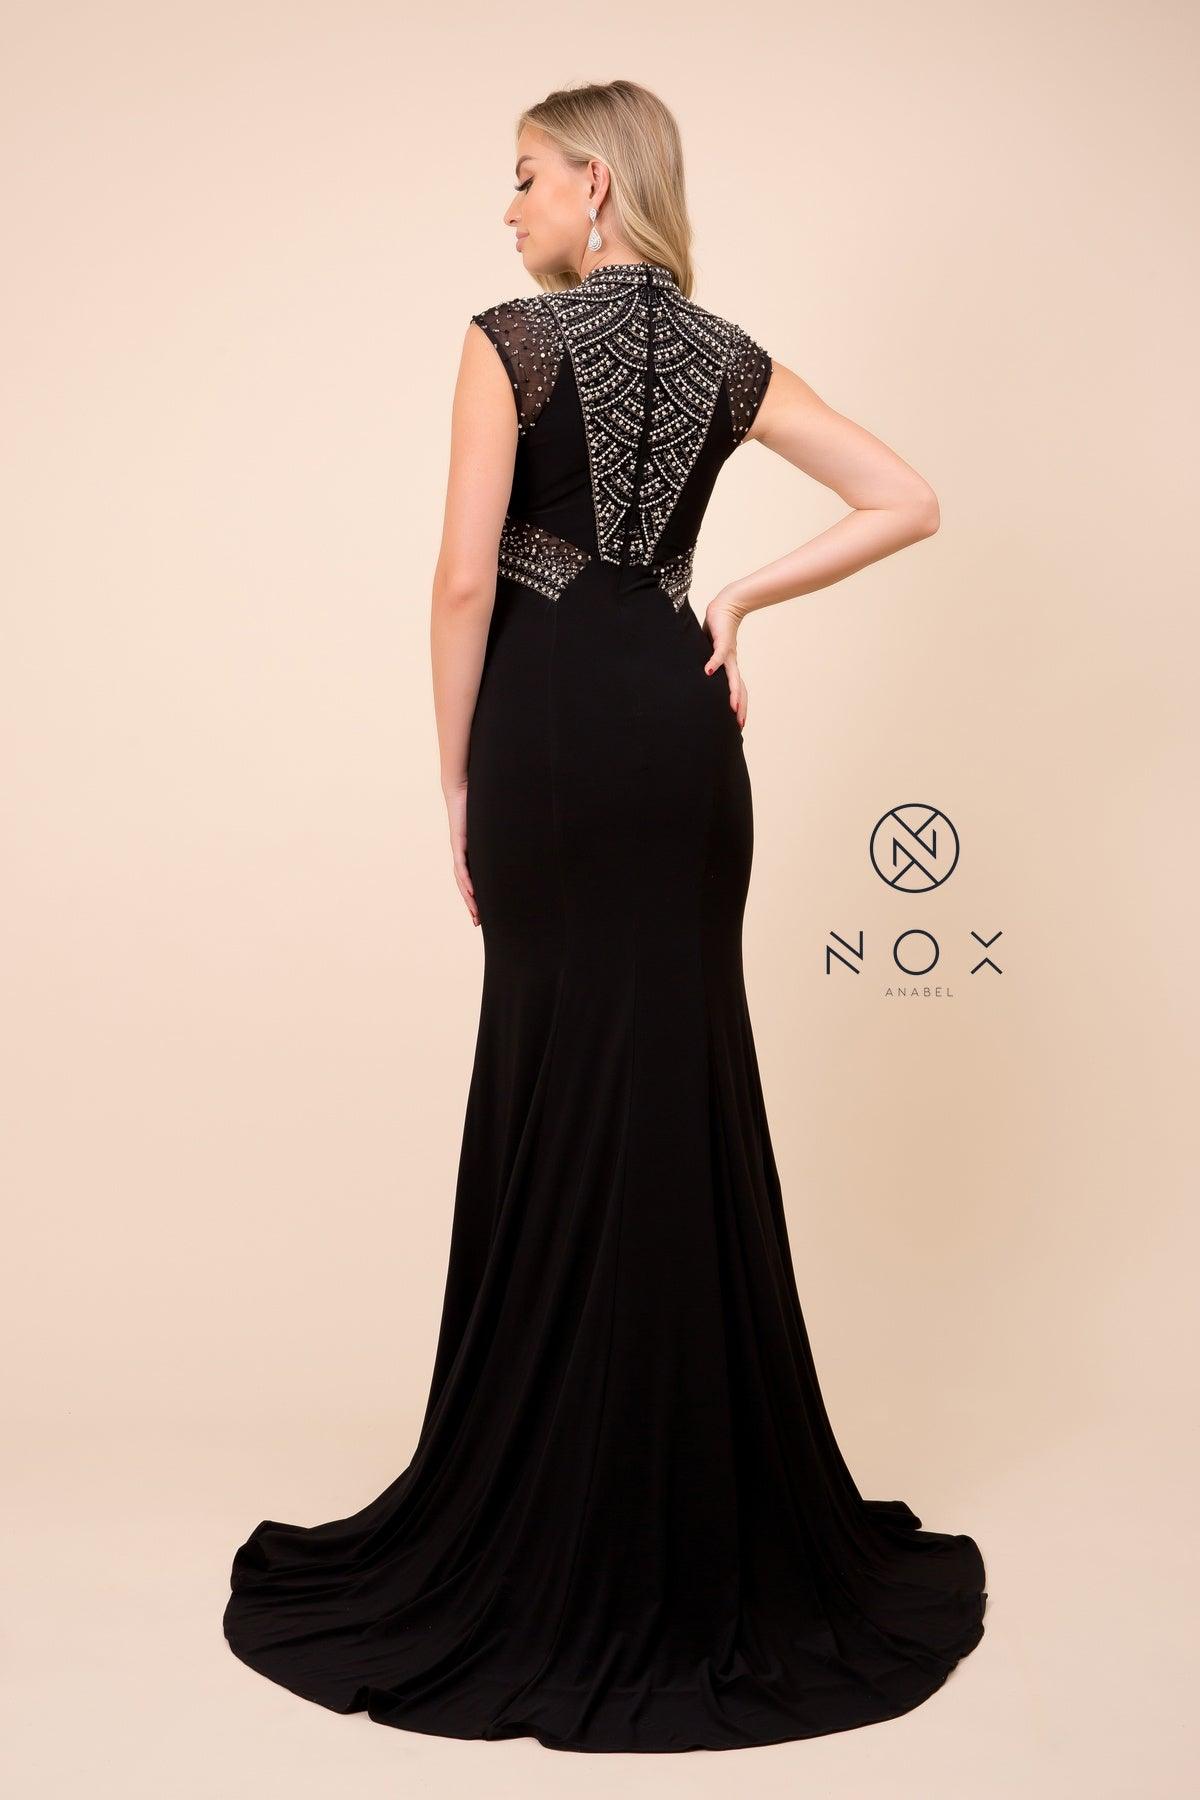 Long Prom Dress Black Formal Evening Gown - The Dress Outlet Nox Anabel